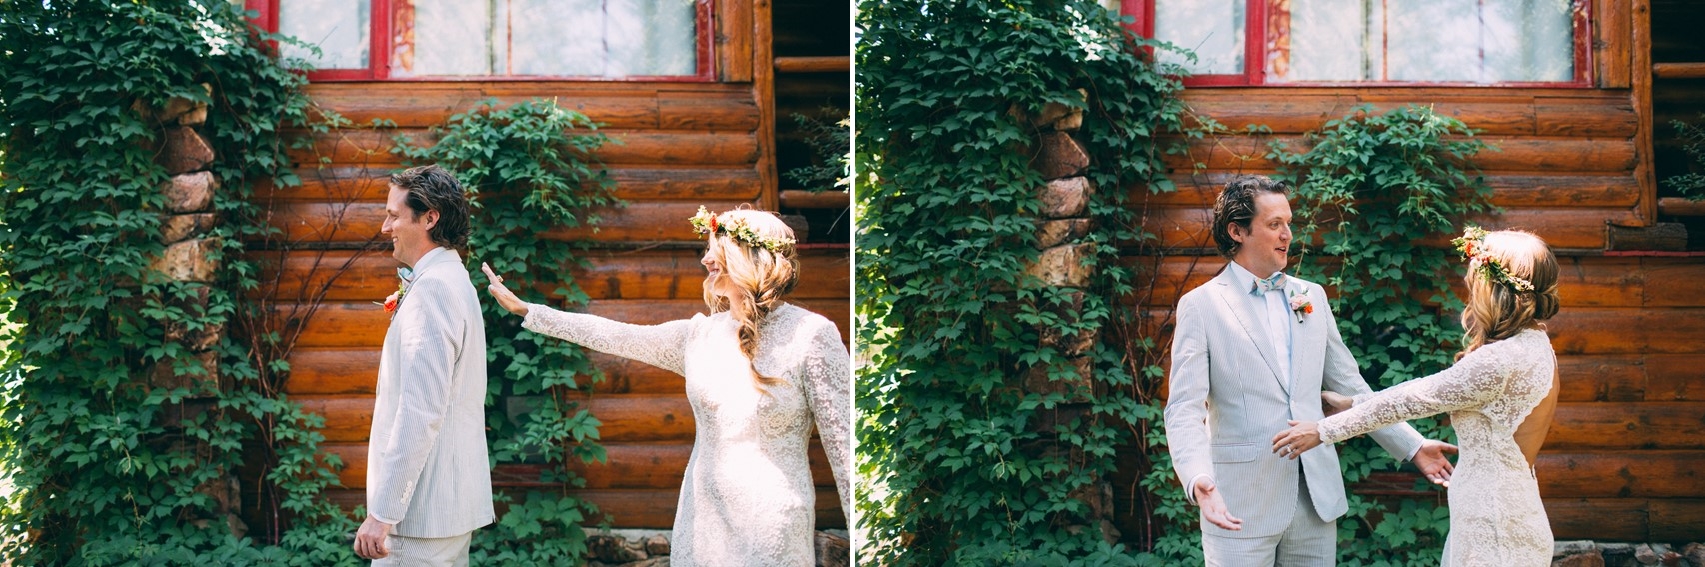 Epic Wedding First Look // Photography ~ The Darlene